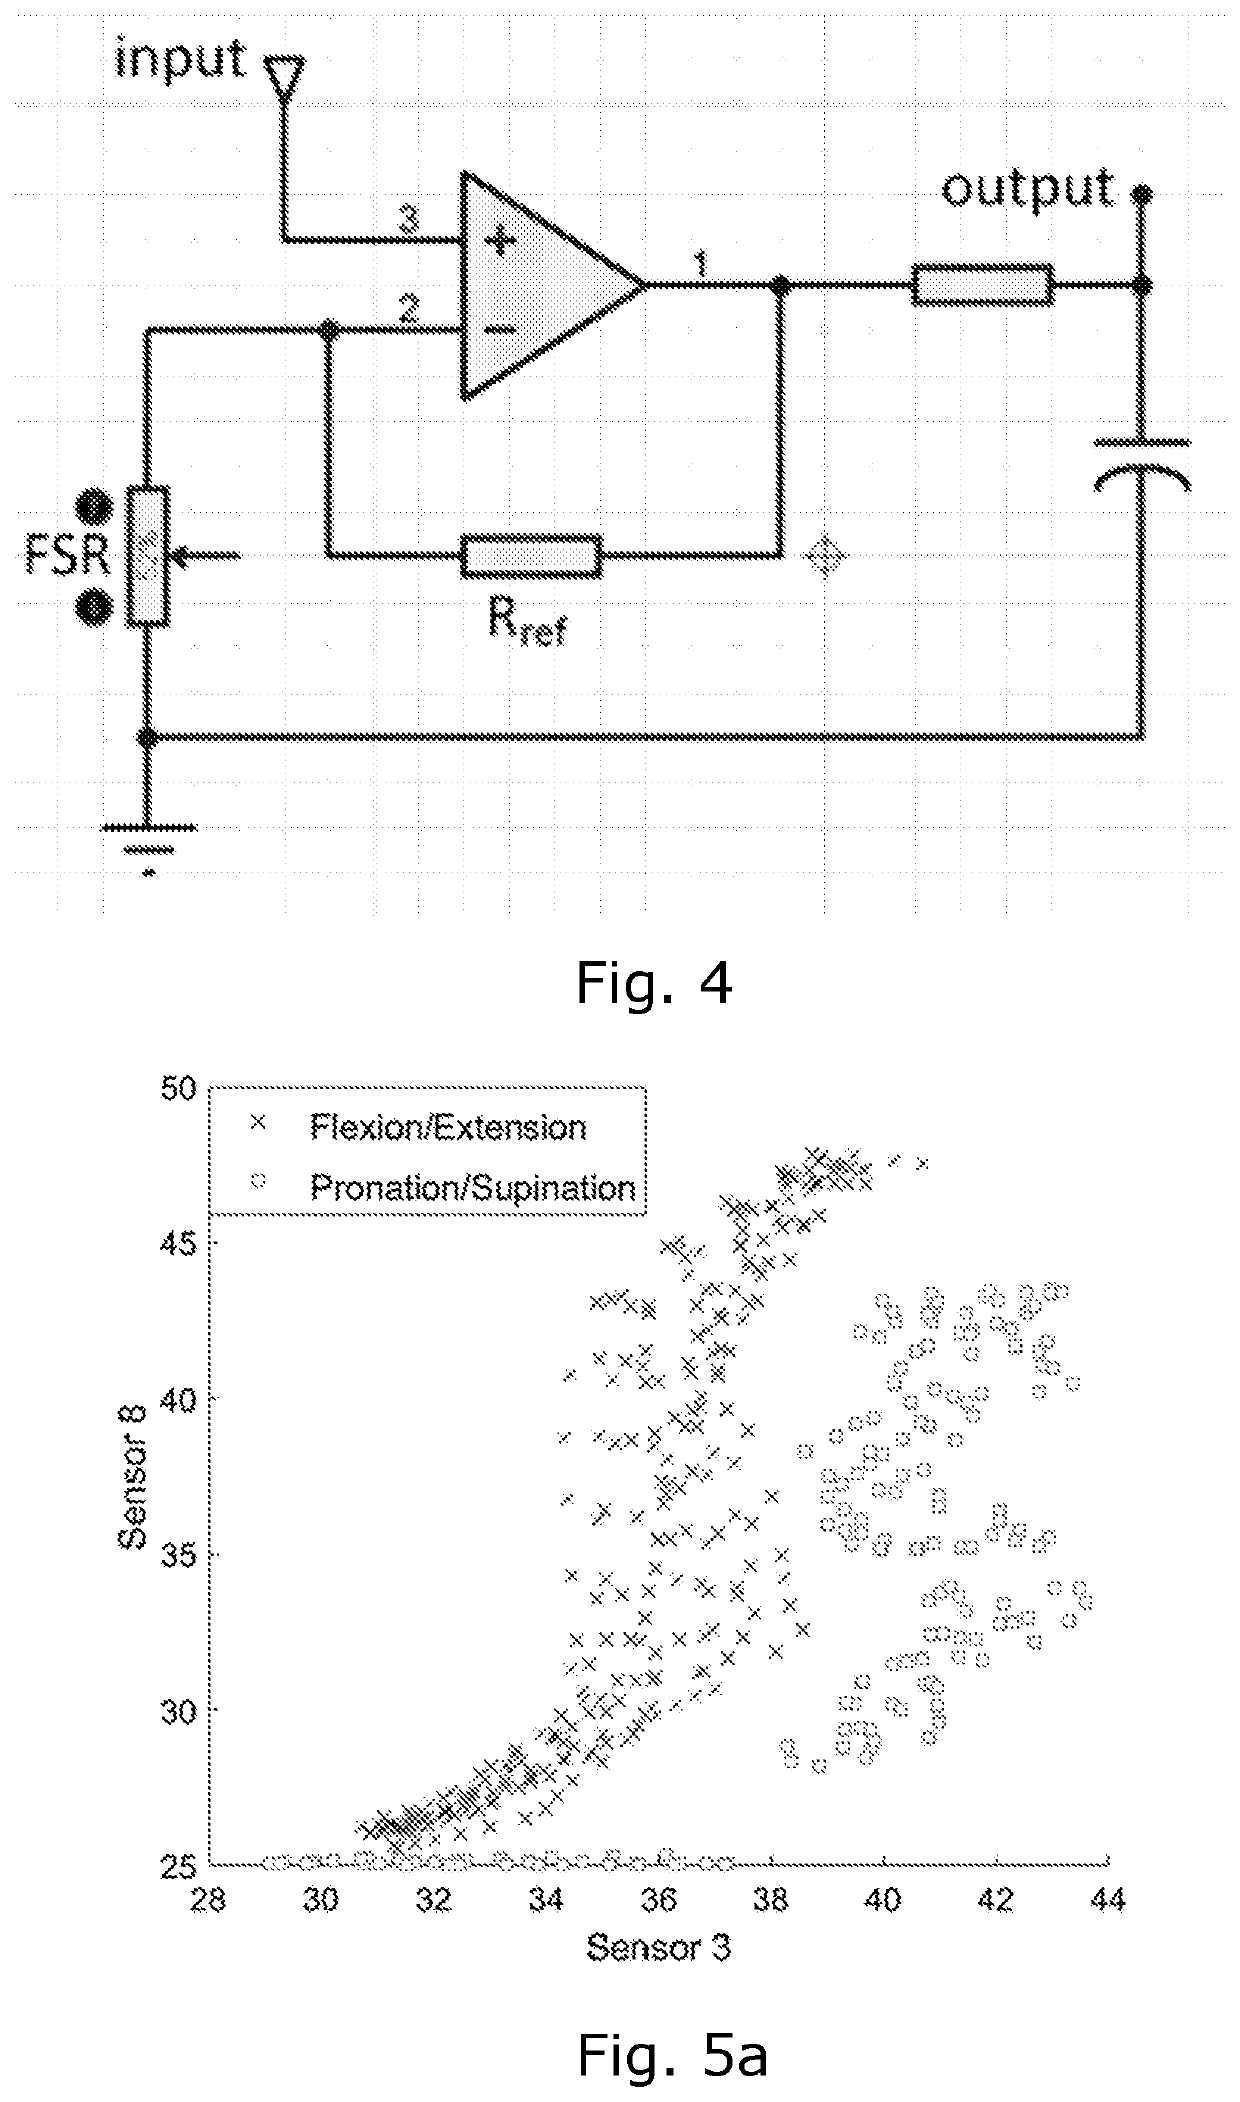 A human intention detection system for motion assistance